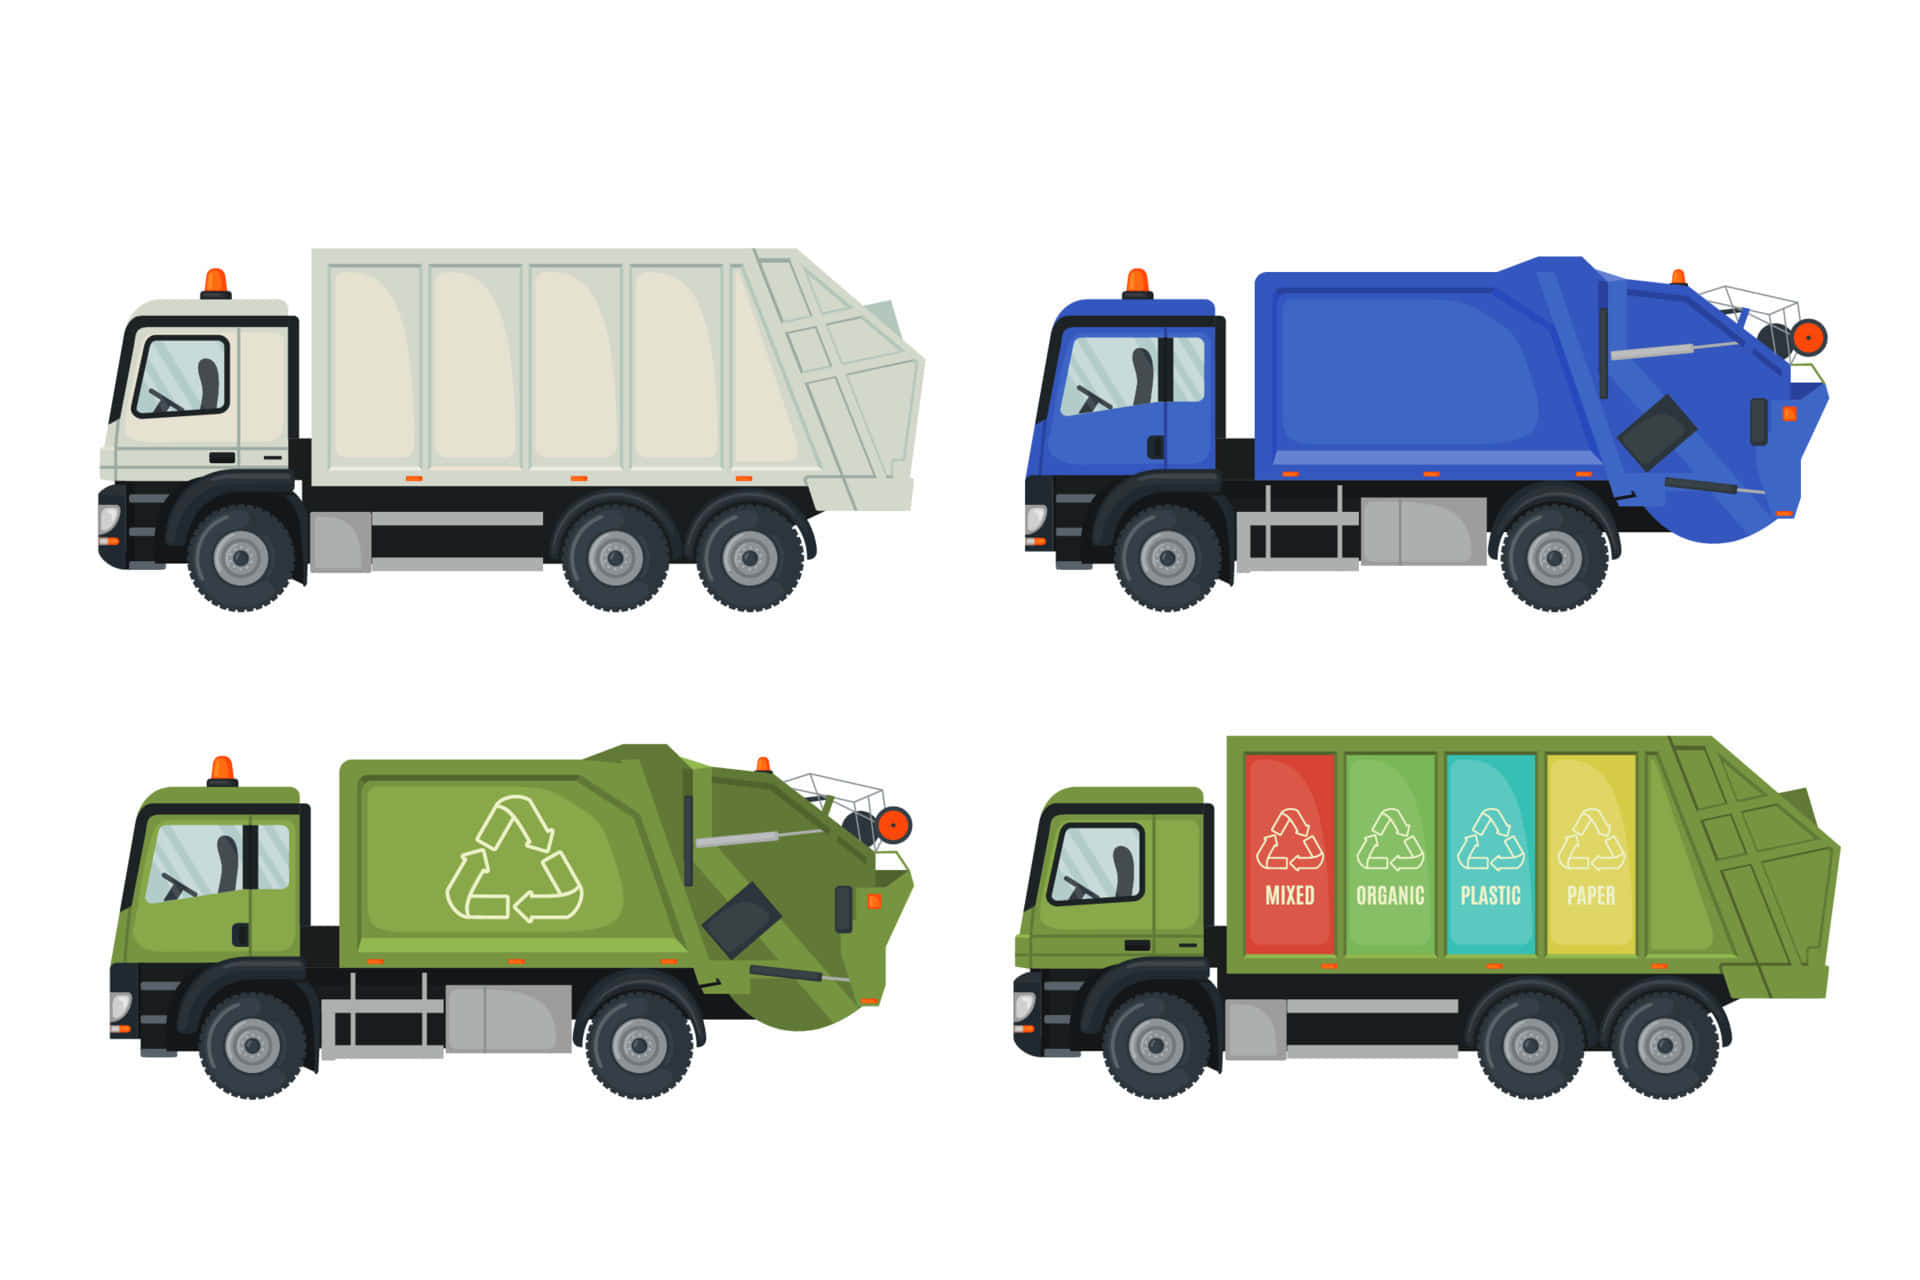 four different garbage trucks with different colors